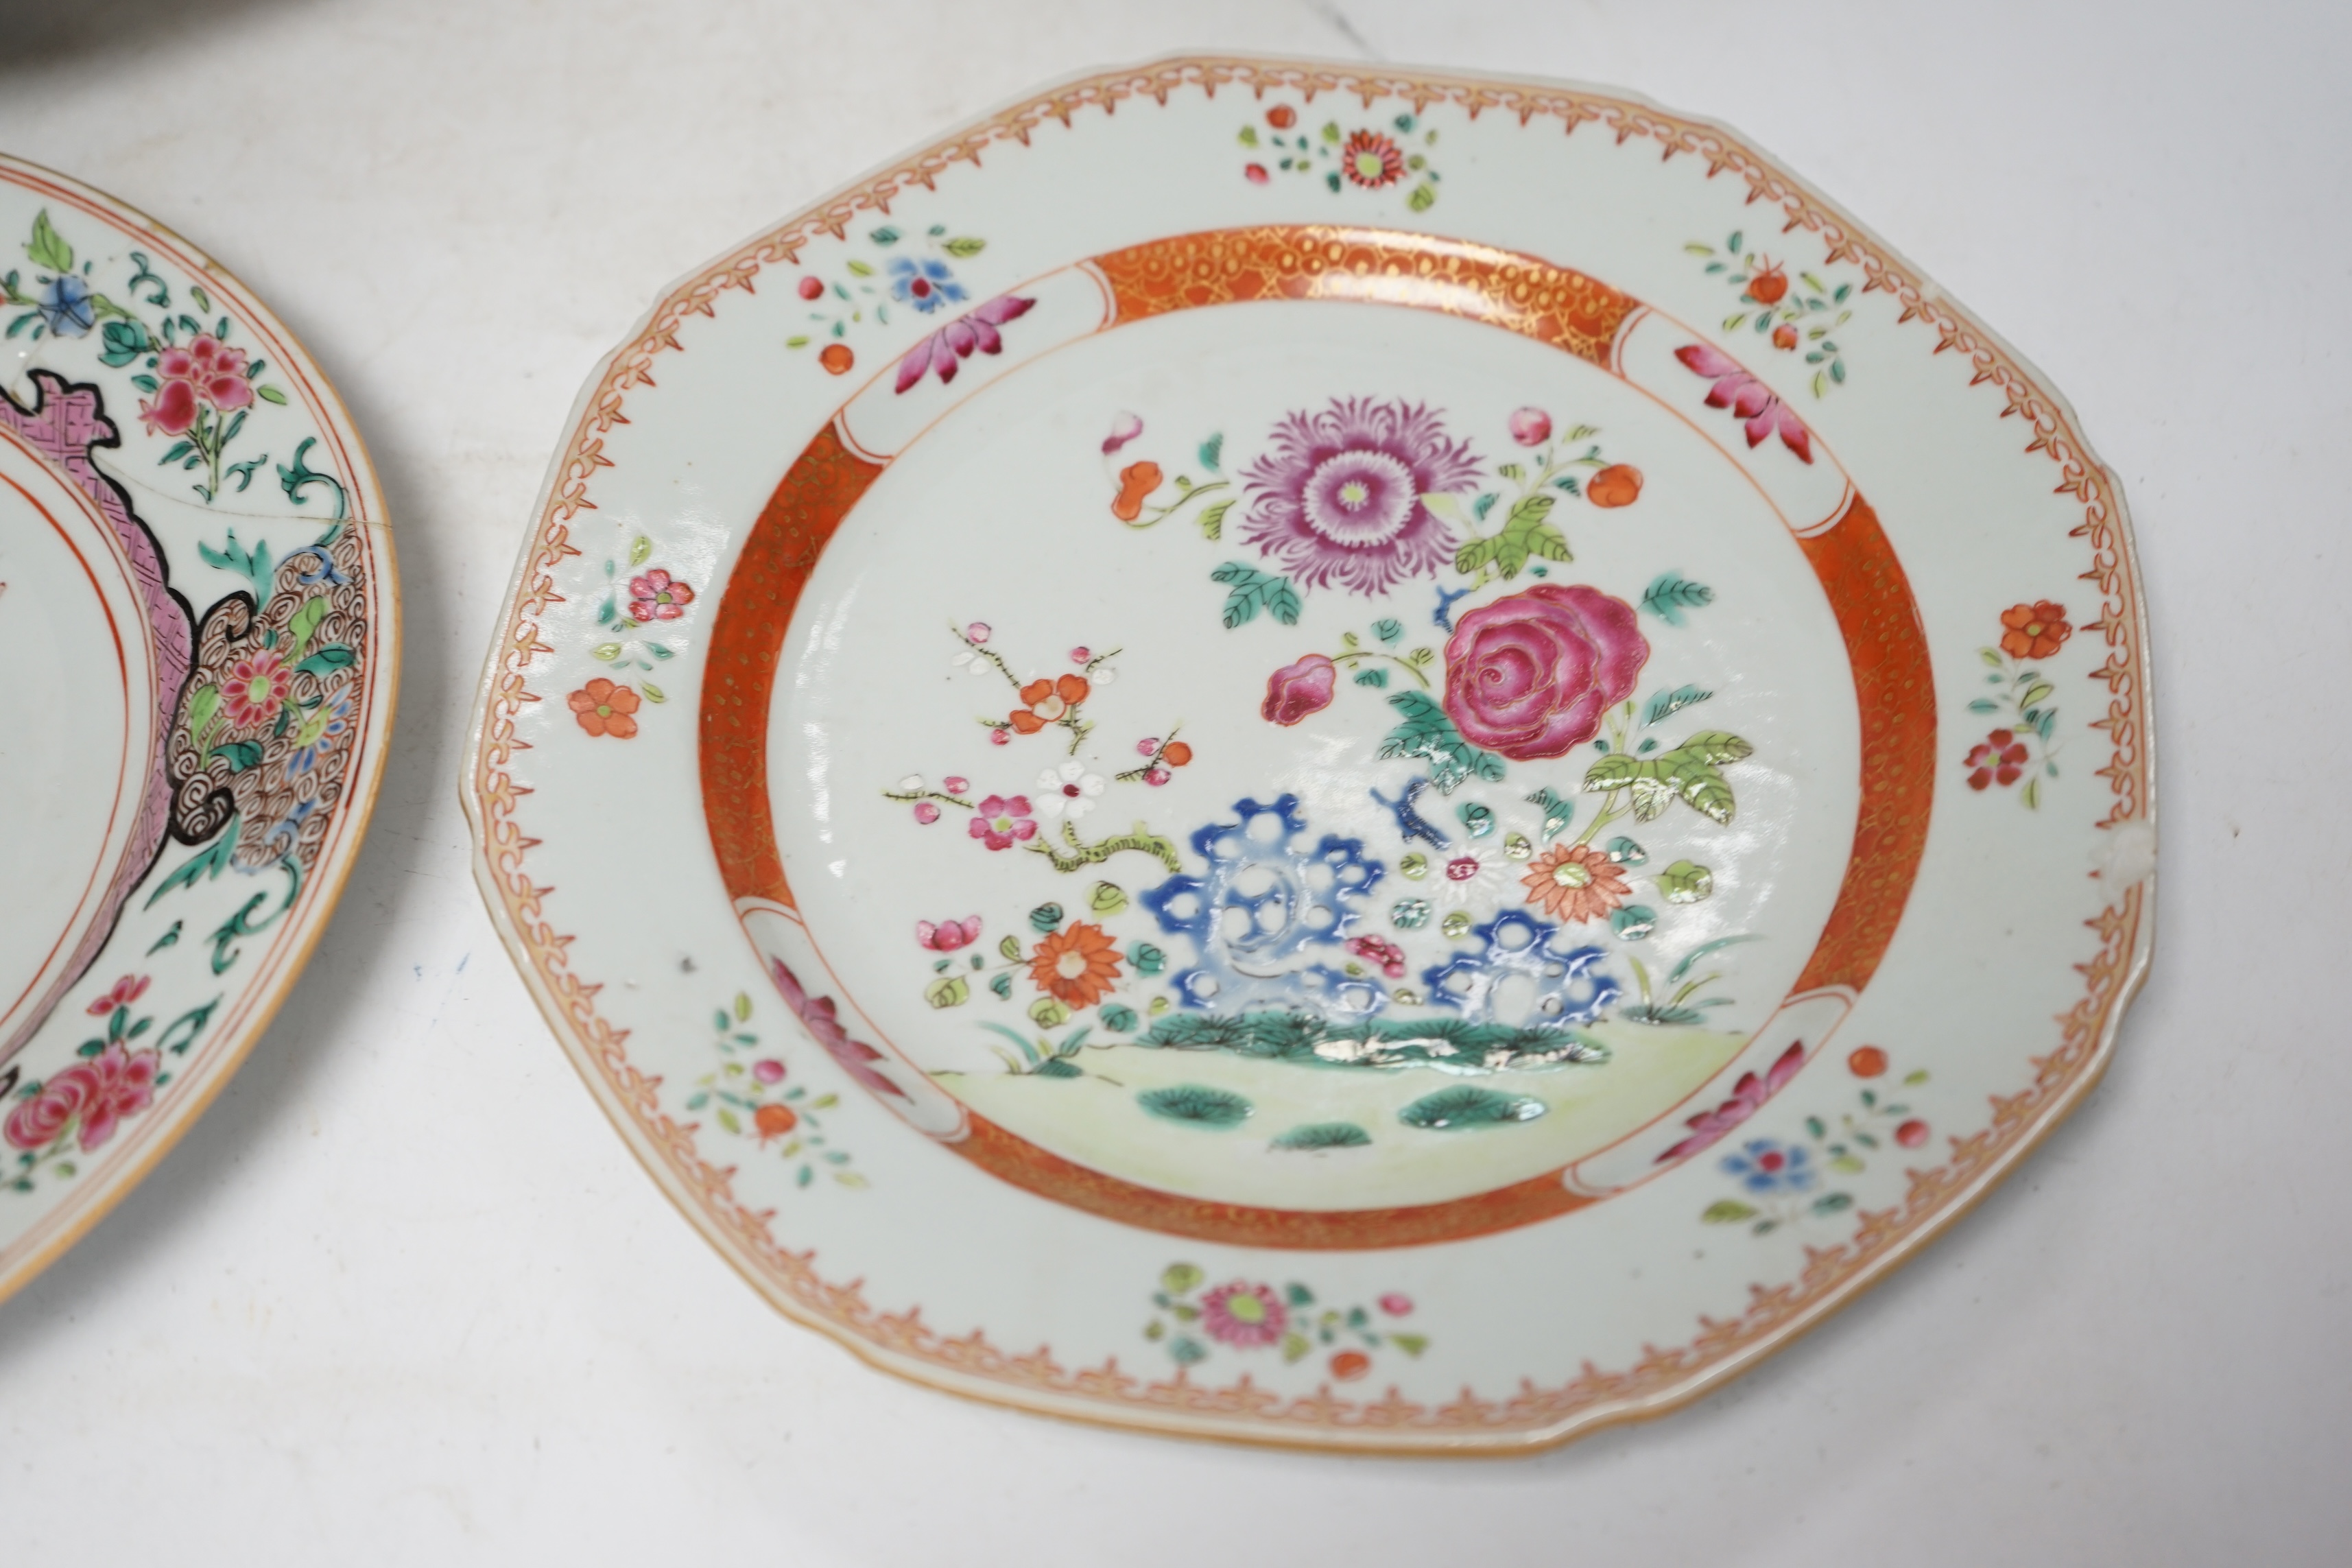 A pair of Chinese famille rose octagonal dishes, one other similar and a Cantonese dish, 18th/19th century, largest 29.5cm (4). Condition - circular famille rose dish with a restored area